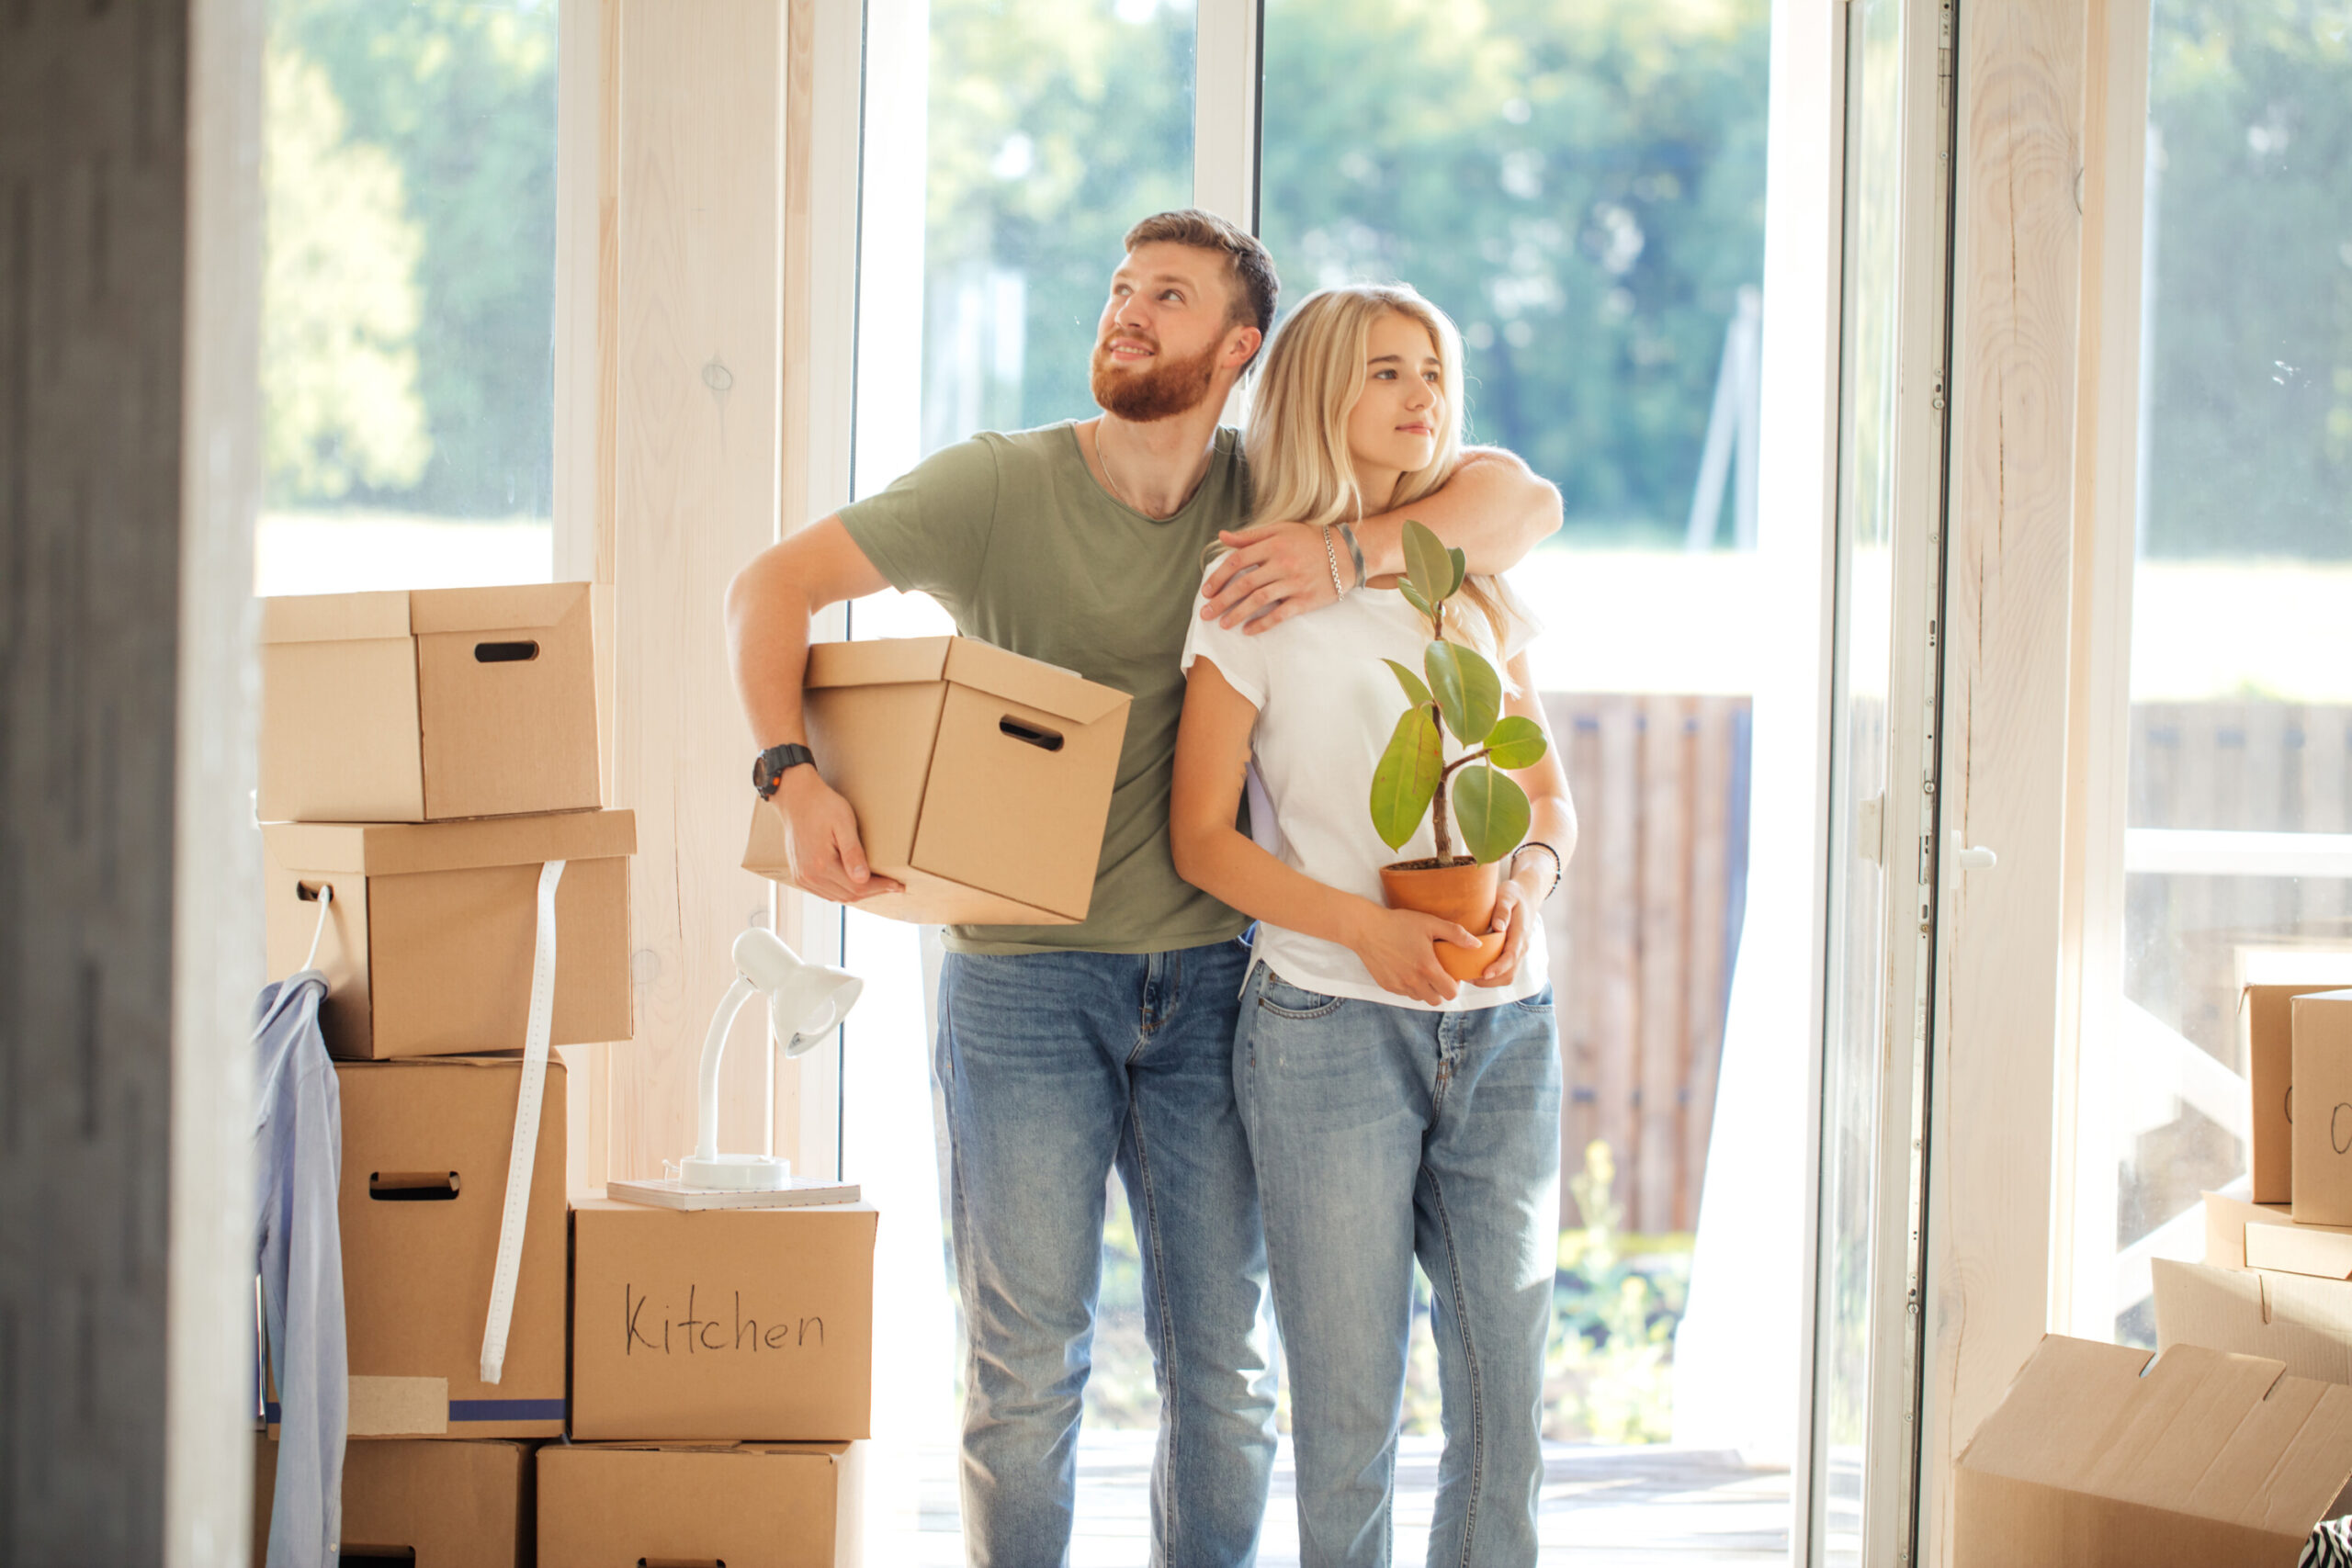 A man holding a moving box and a woman holding a plant embrace, standing in front of moving boxes and look around their home.